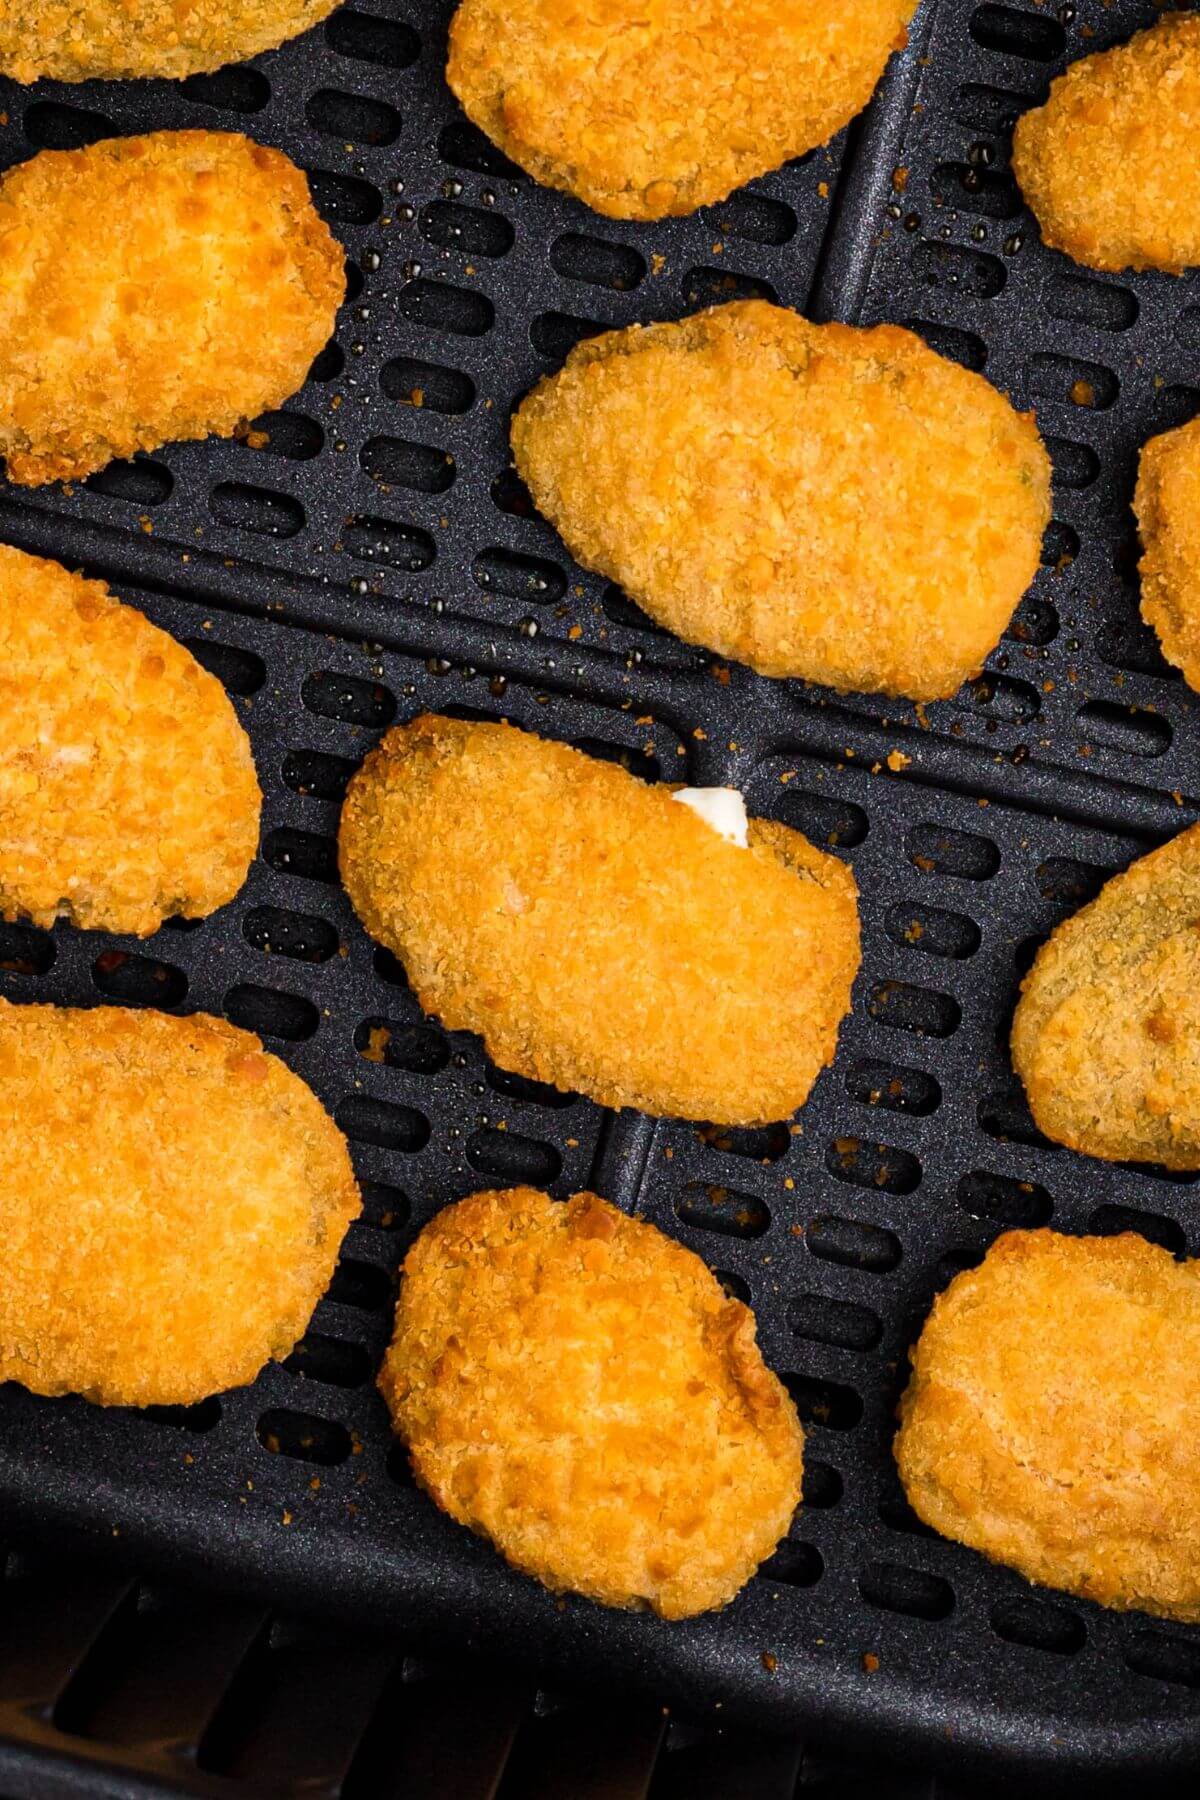 Golden crispy breaded jalapeno poppers in the air fryer basket after being cooked.